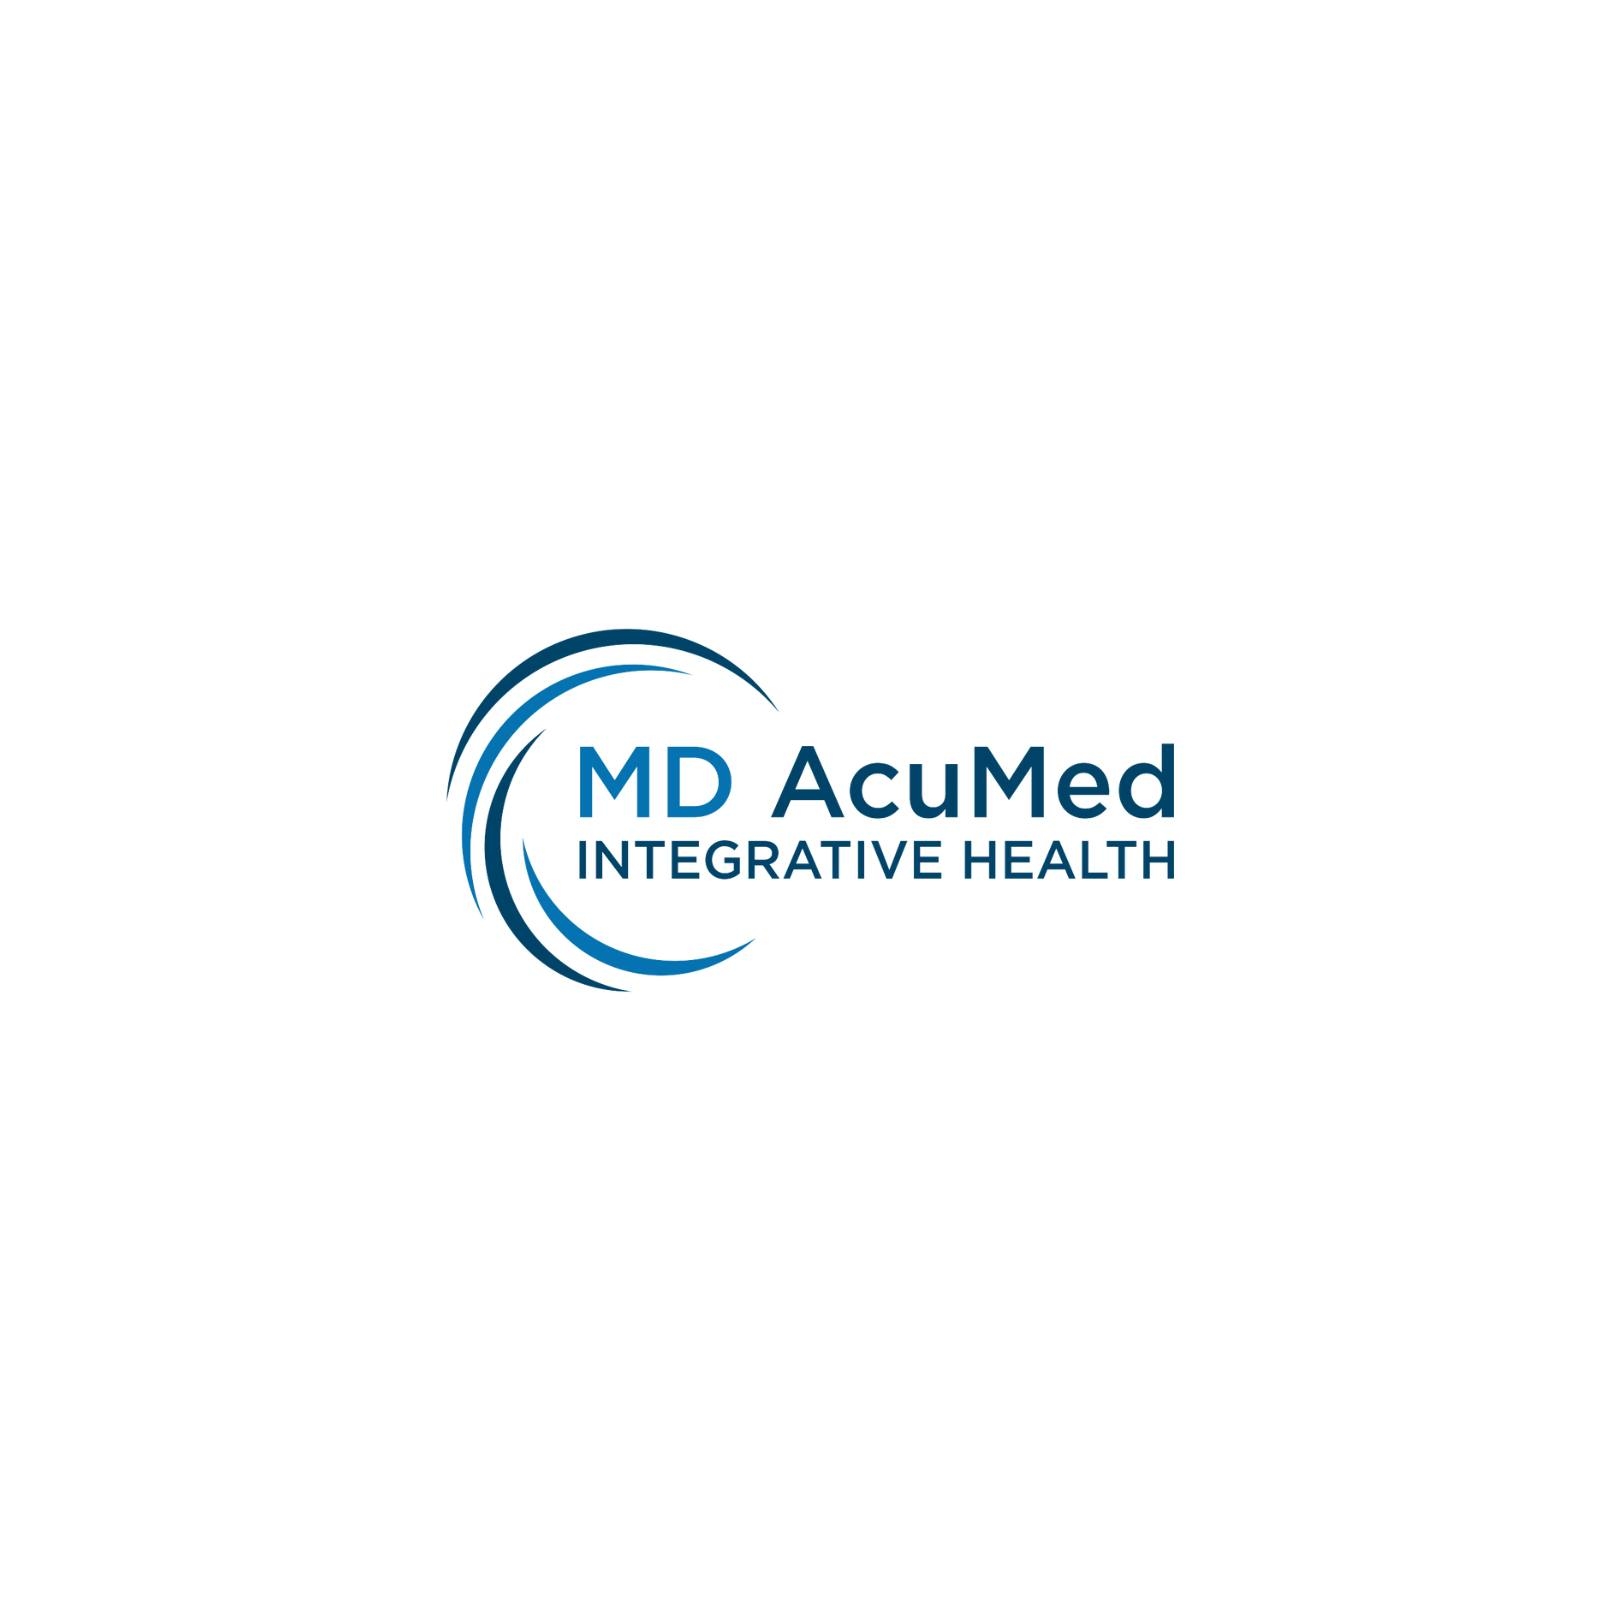 MD AcuMed Integrative Health